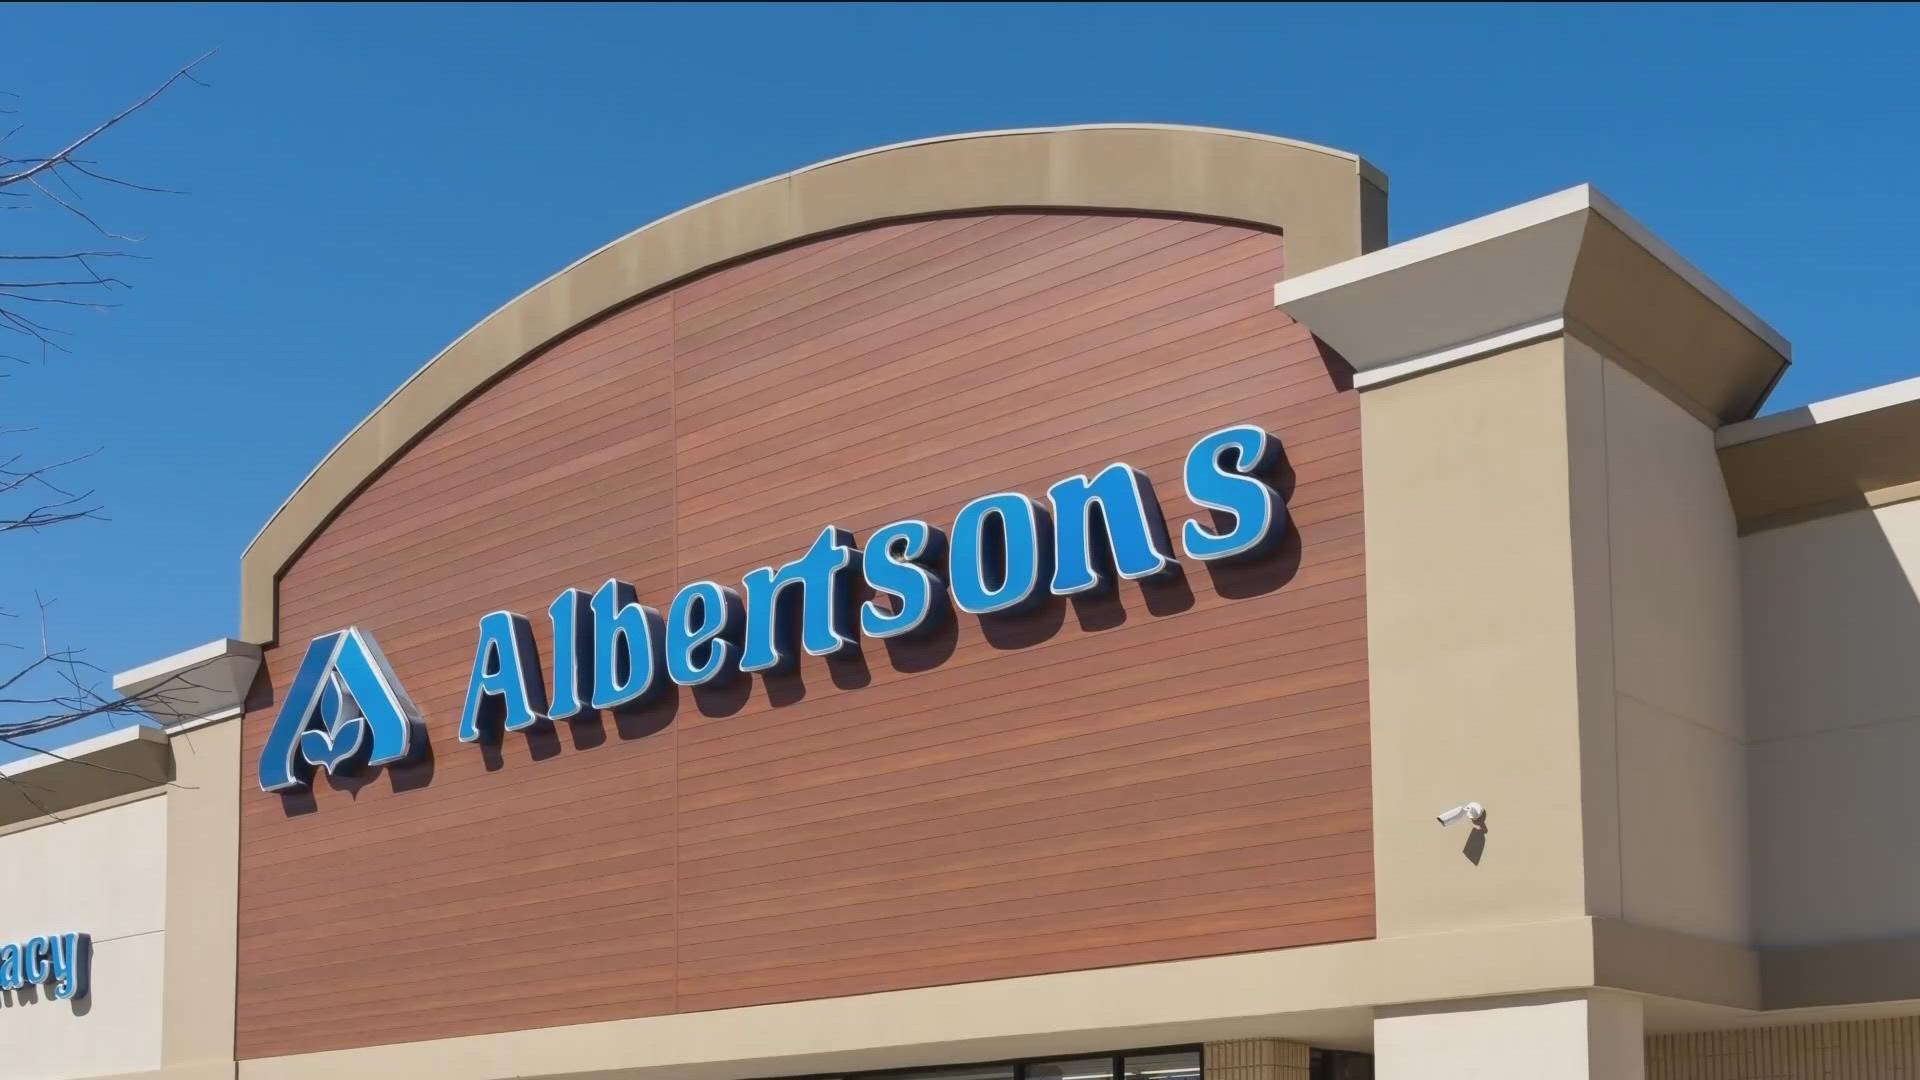 Albertsons is set to merge with Kroger.